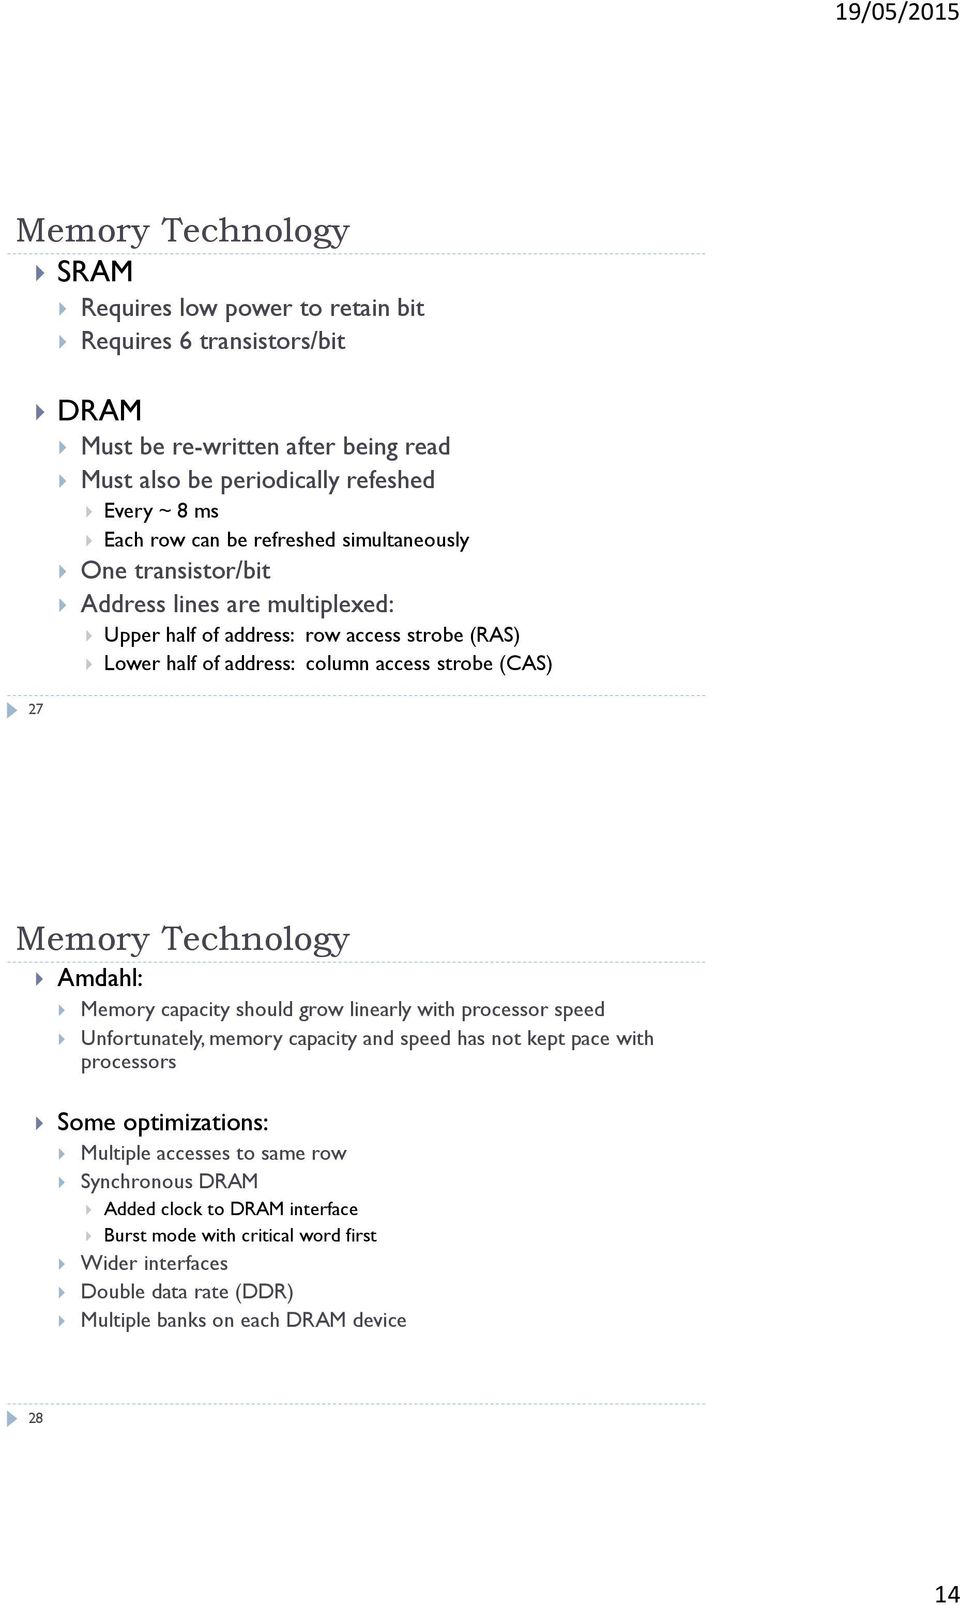 Memory Technology Amdahl: Memory capacity should grow linearly with processor speed Unfortunately, memory capacity and speed has not kept pace with processors Some optimizations: